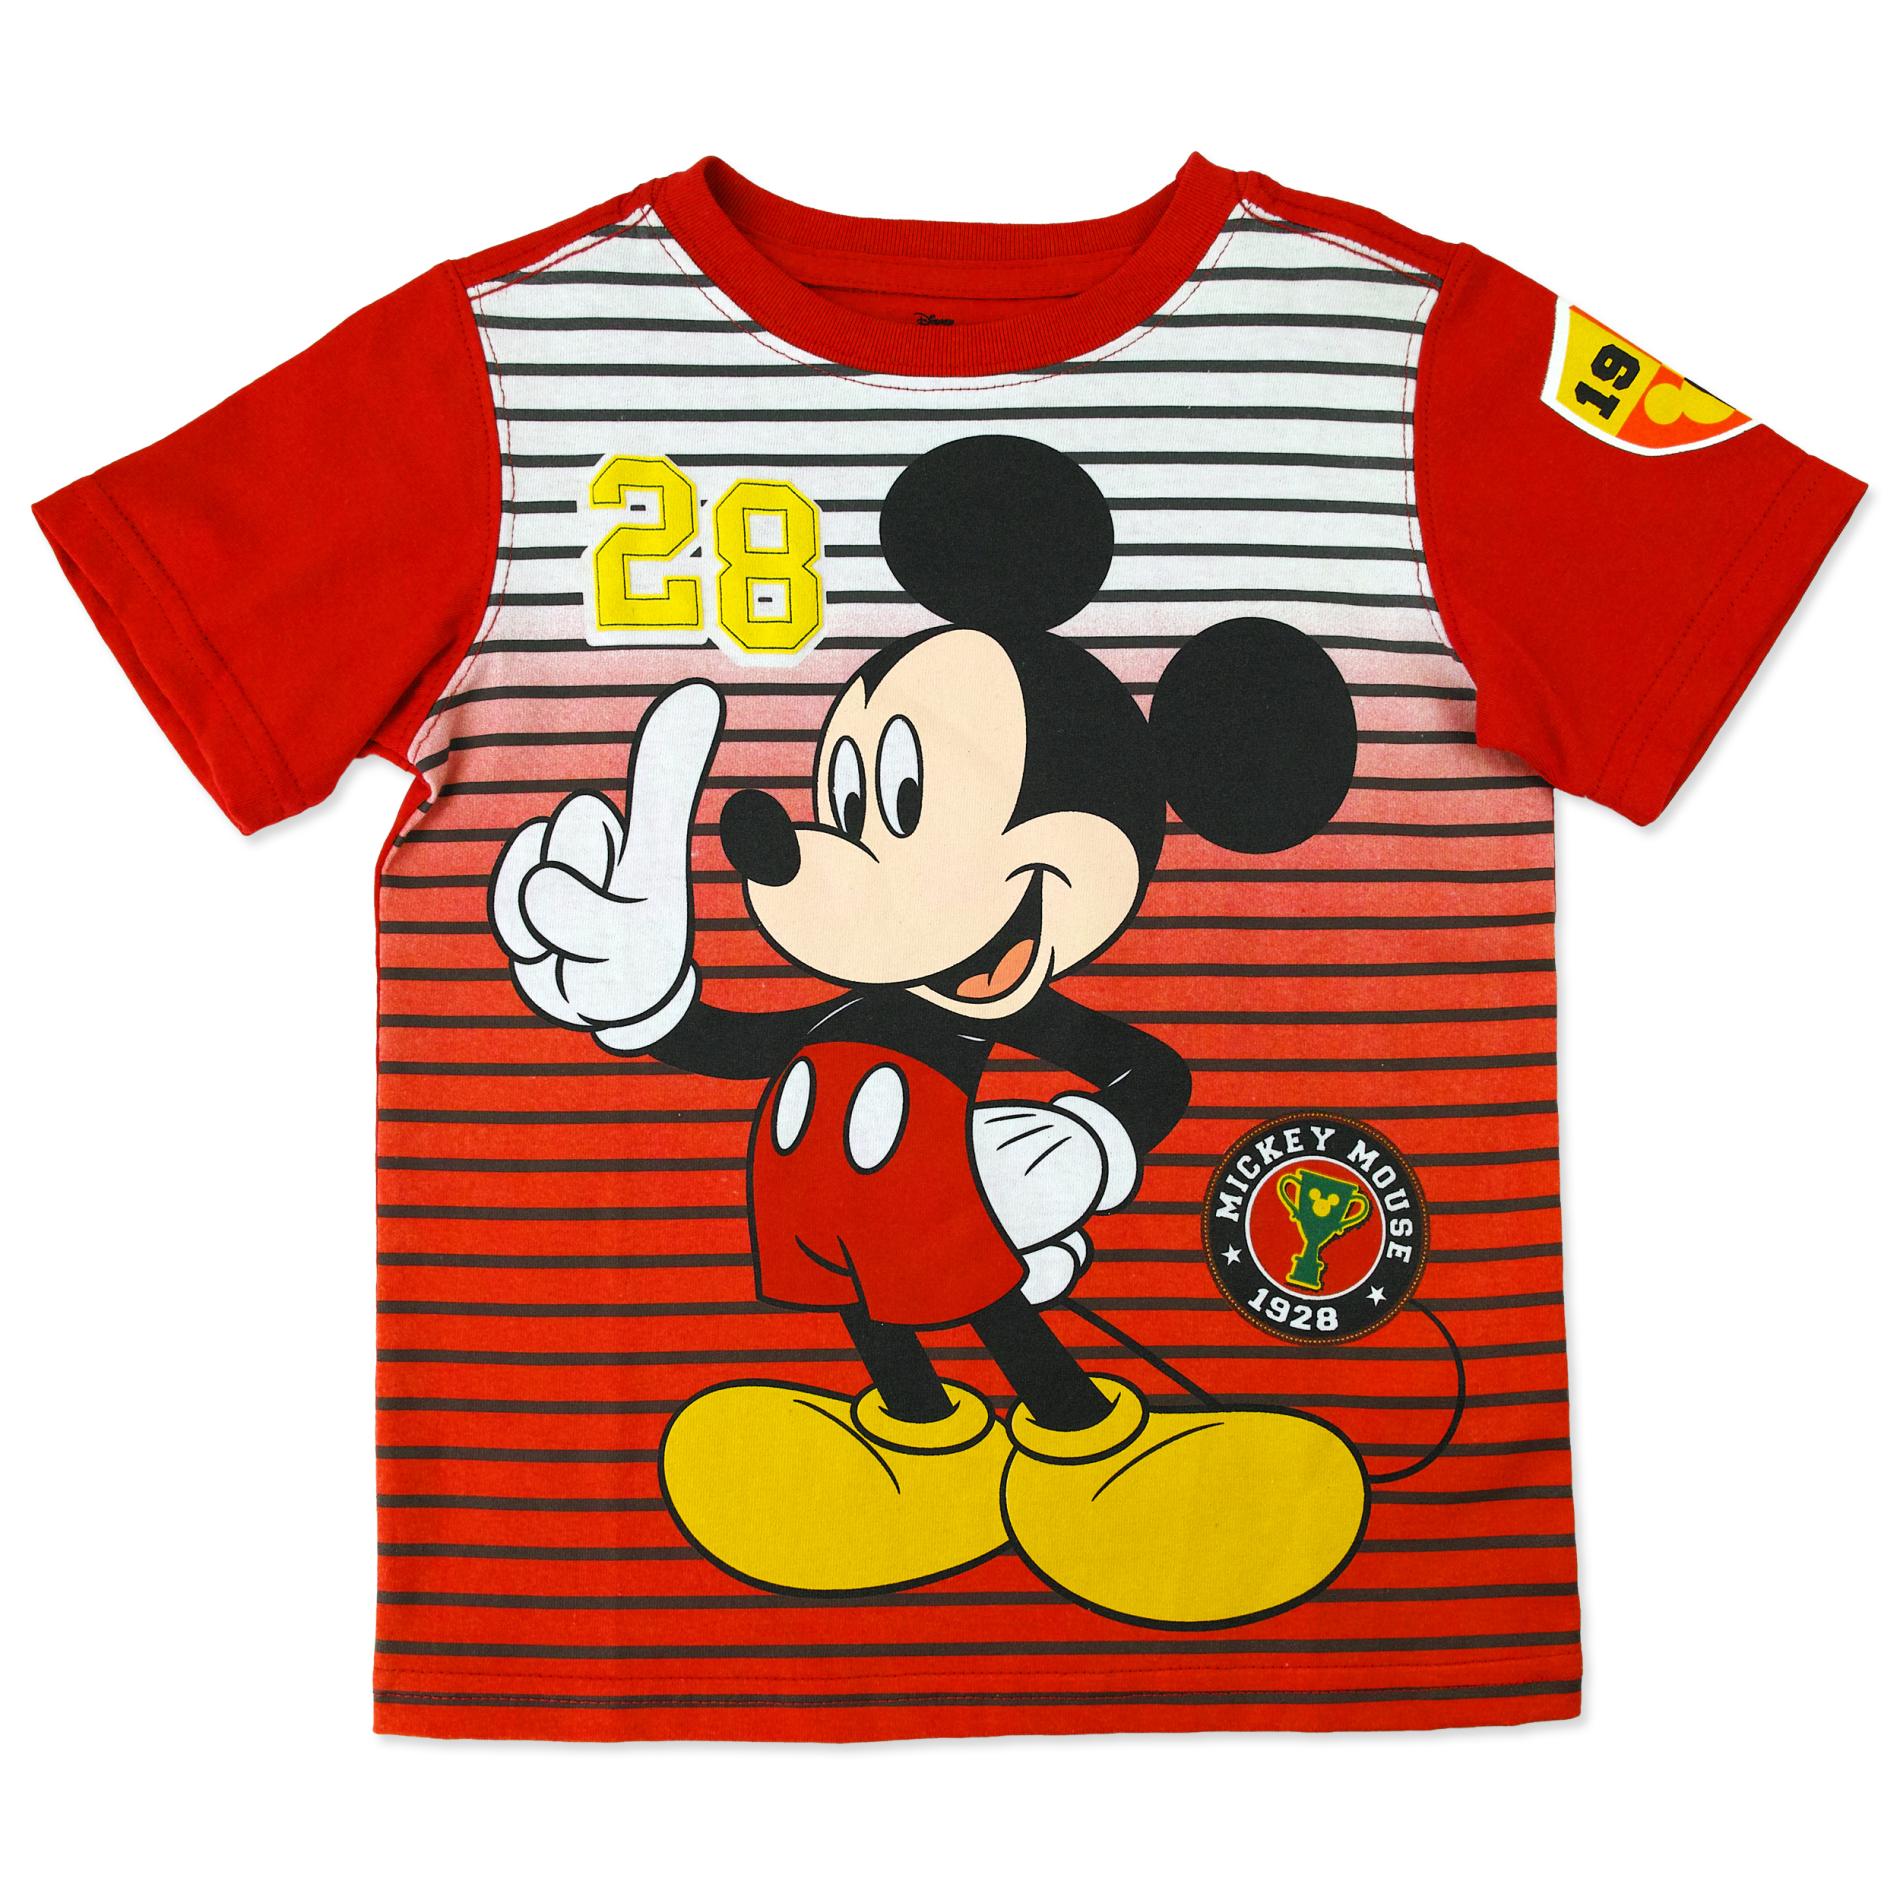 Disney Mickey Mouse Toddler Boys' Graphic T-Shirt